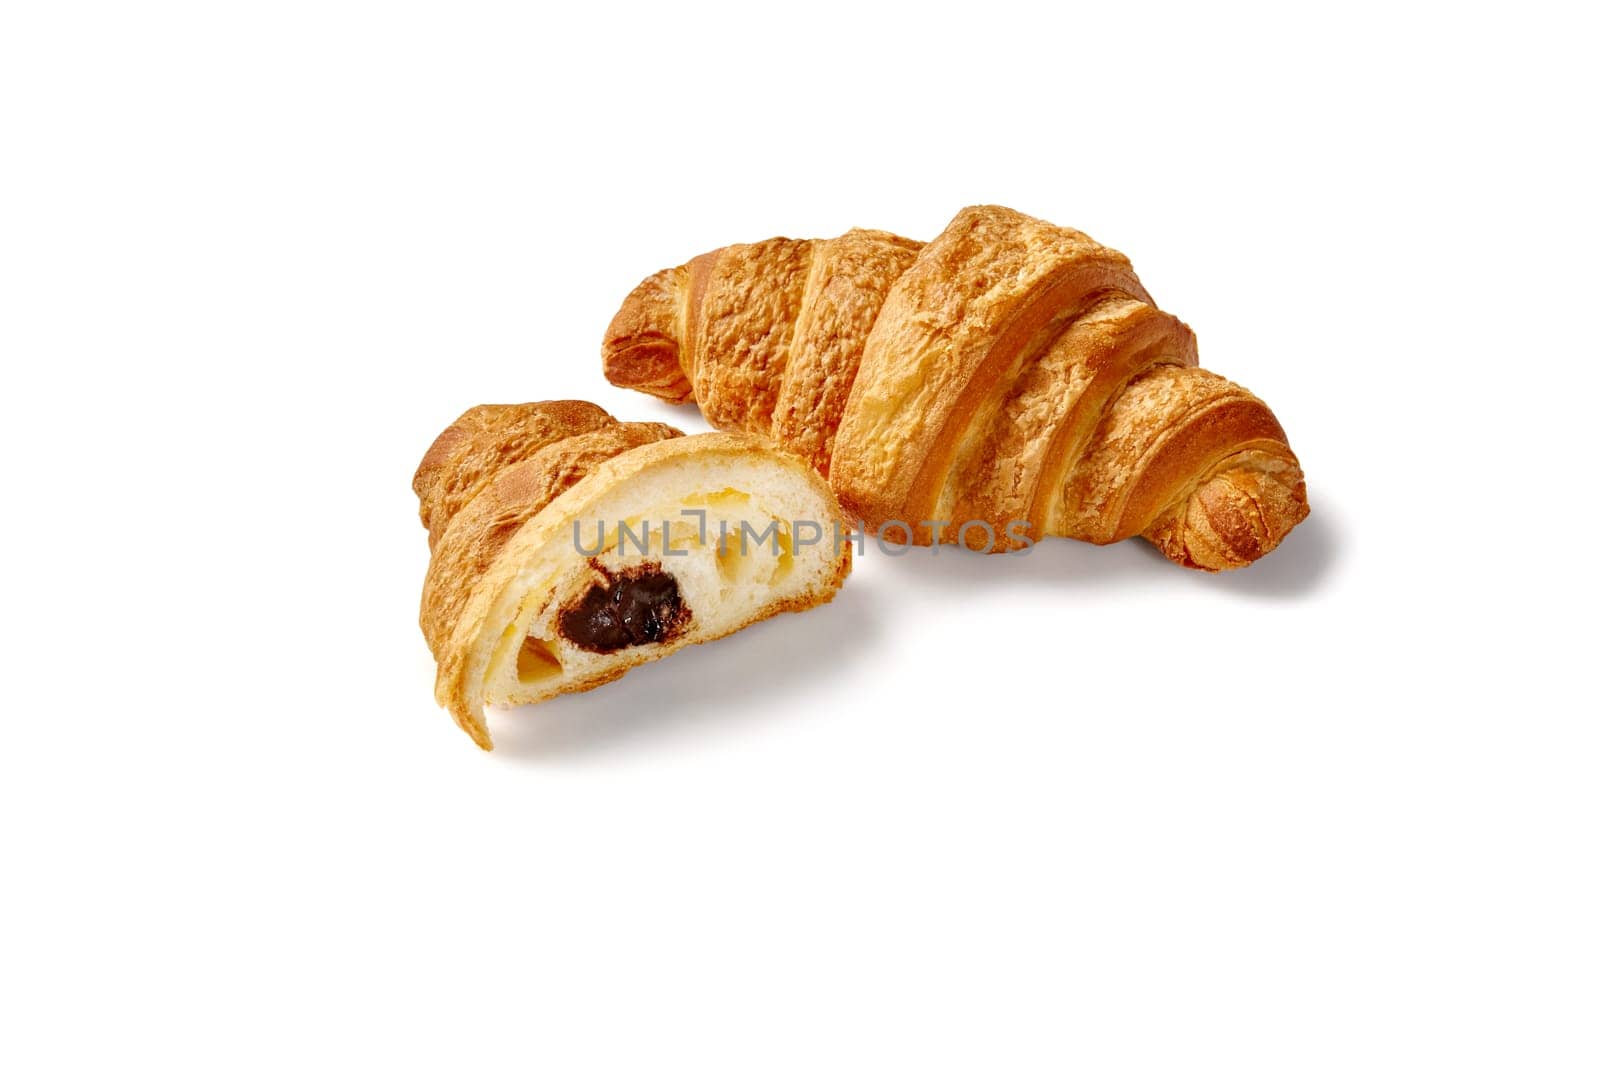 Whole and sliced gourmet fluffy croissants with rich chocolate cream filling, isolated on white background. French style viennoiserie pastry